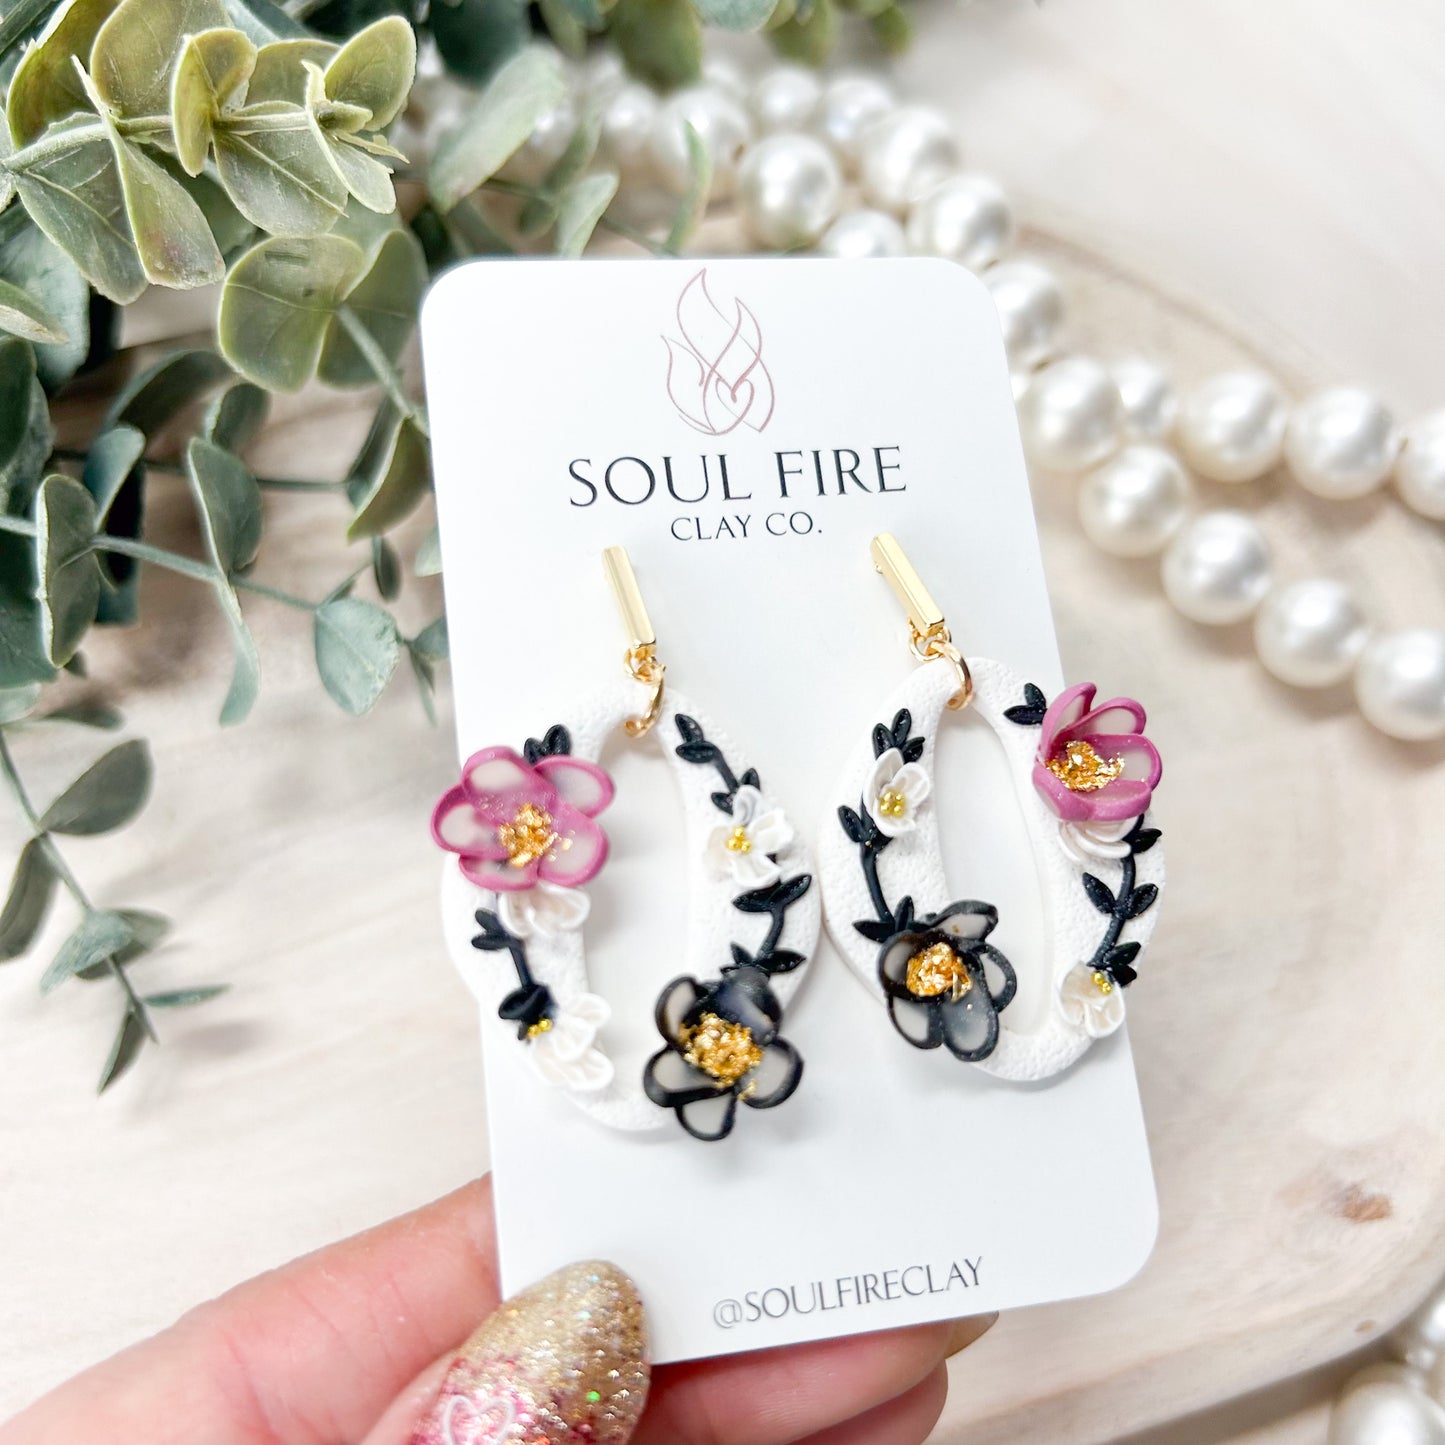 Translucent Floral Statement Earrings